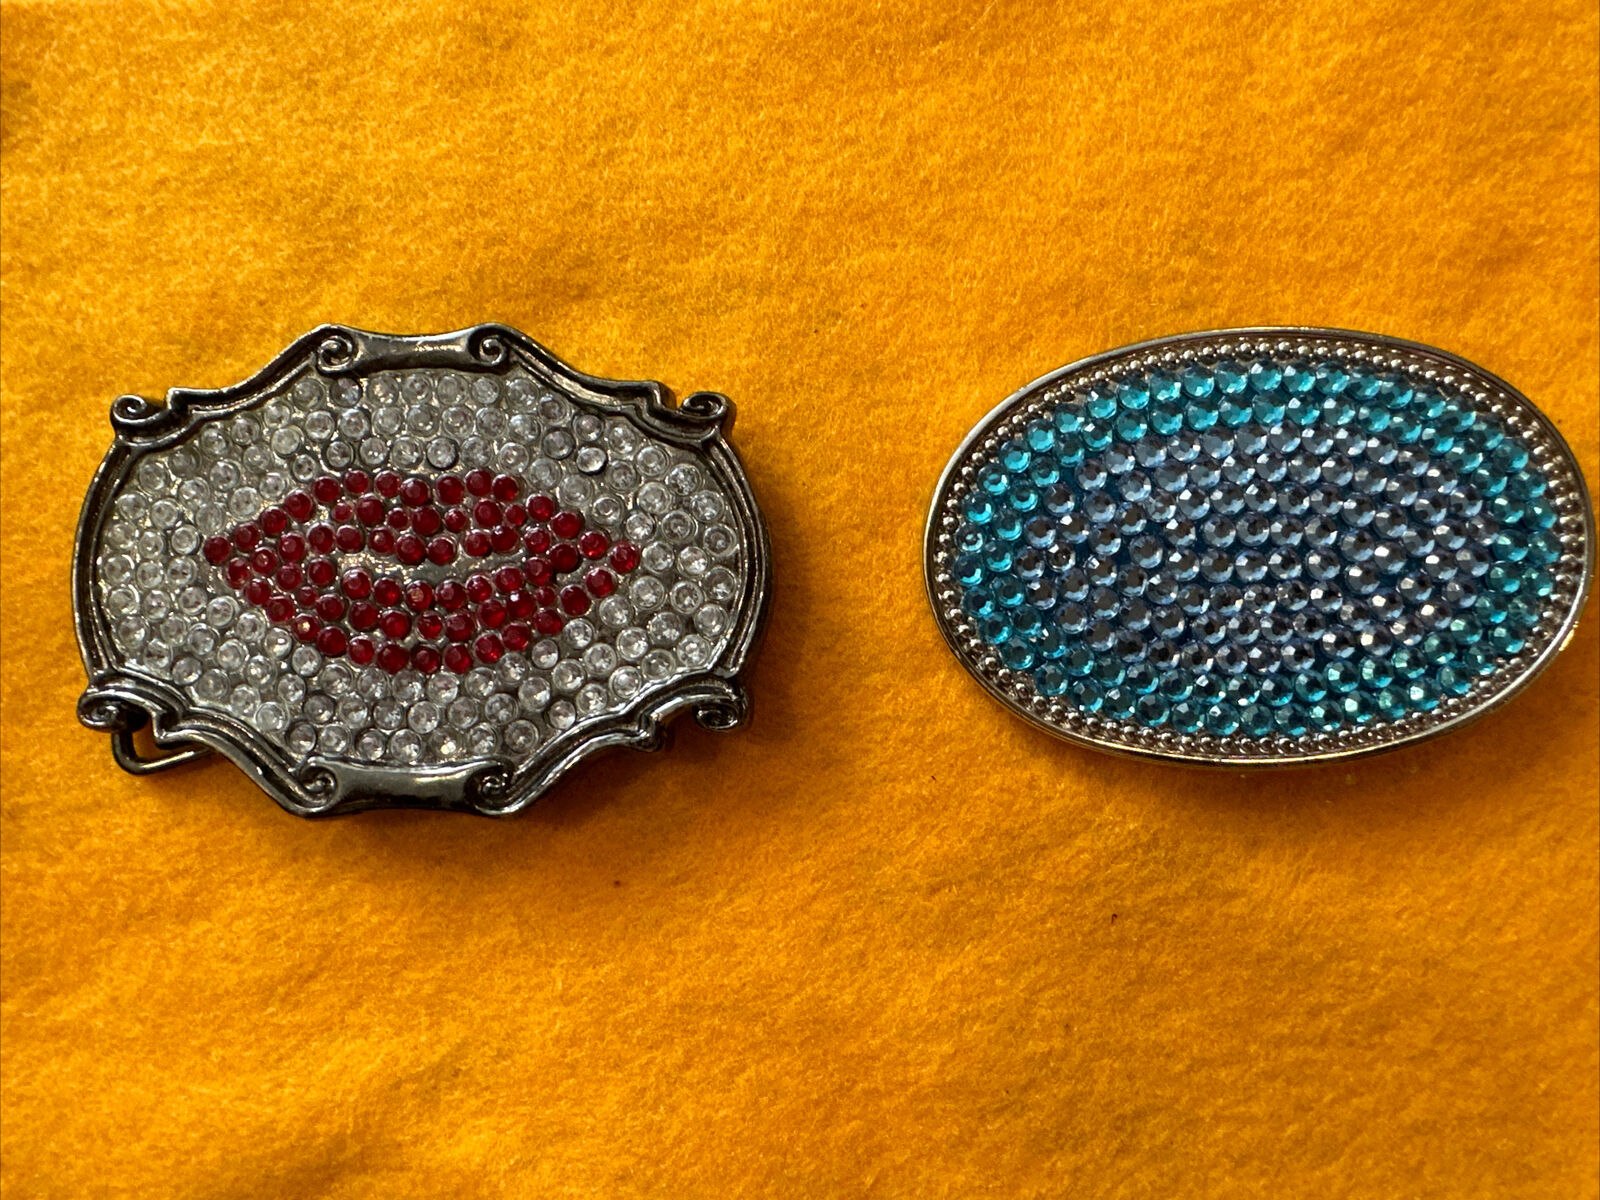 2 CLASSIC BELT BUCKLES RED LIPS & BlUE BEJEWELED STONES SILVER TONE